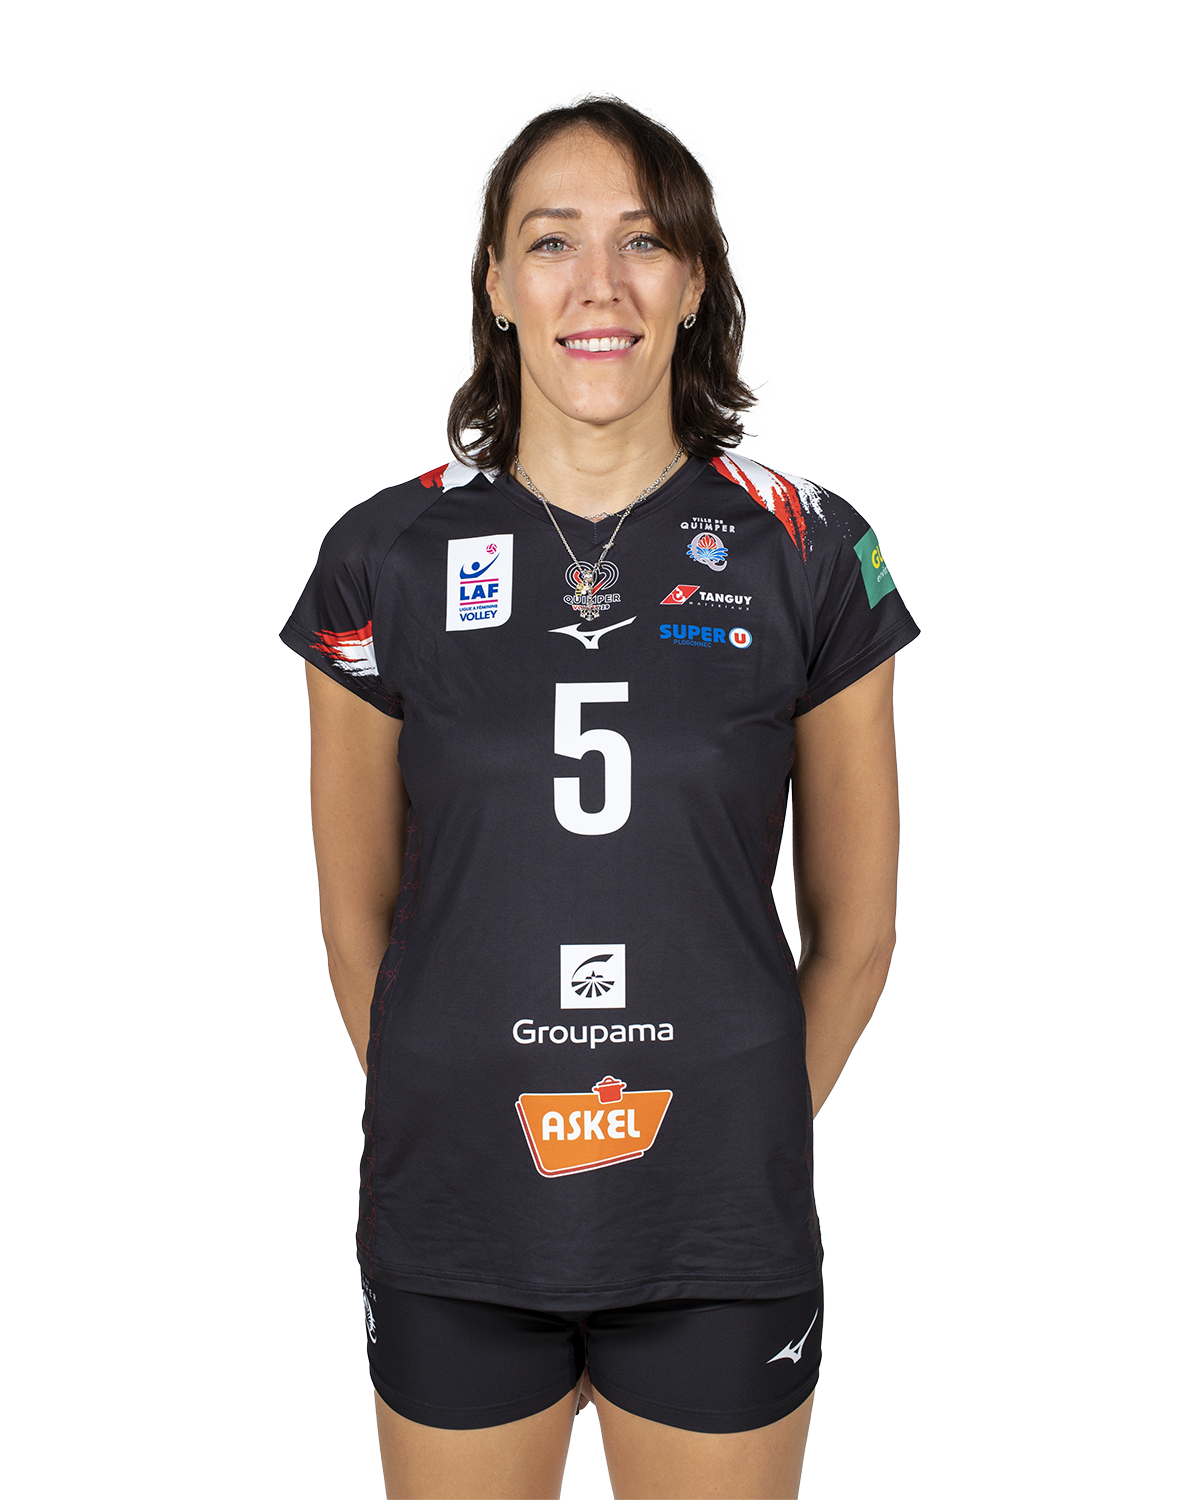 katarine osadchuk quimper volley ligue a volleyball